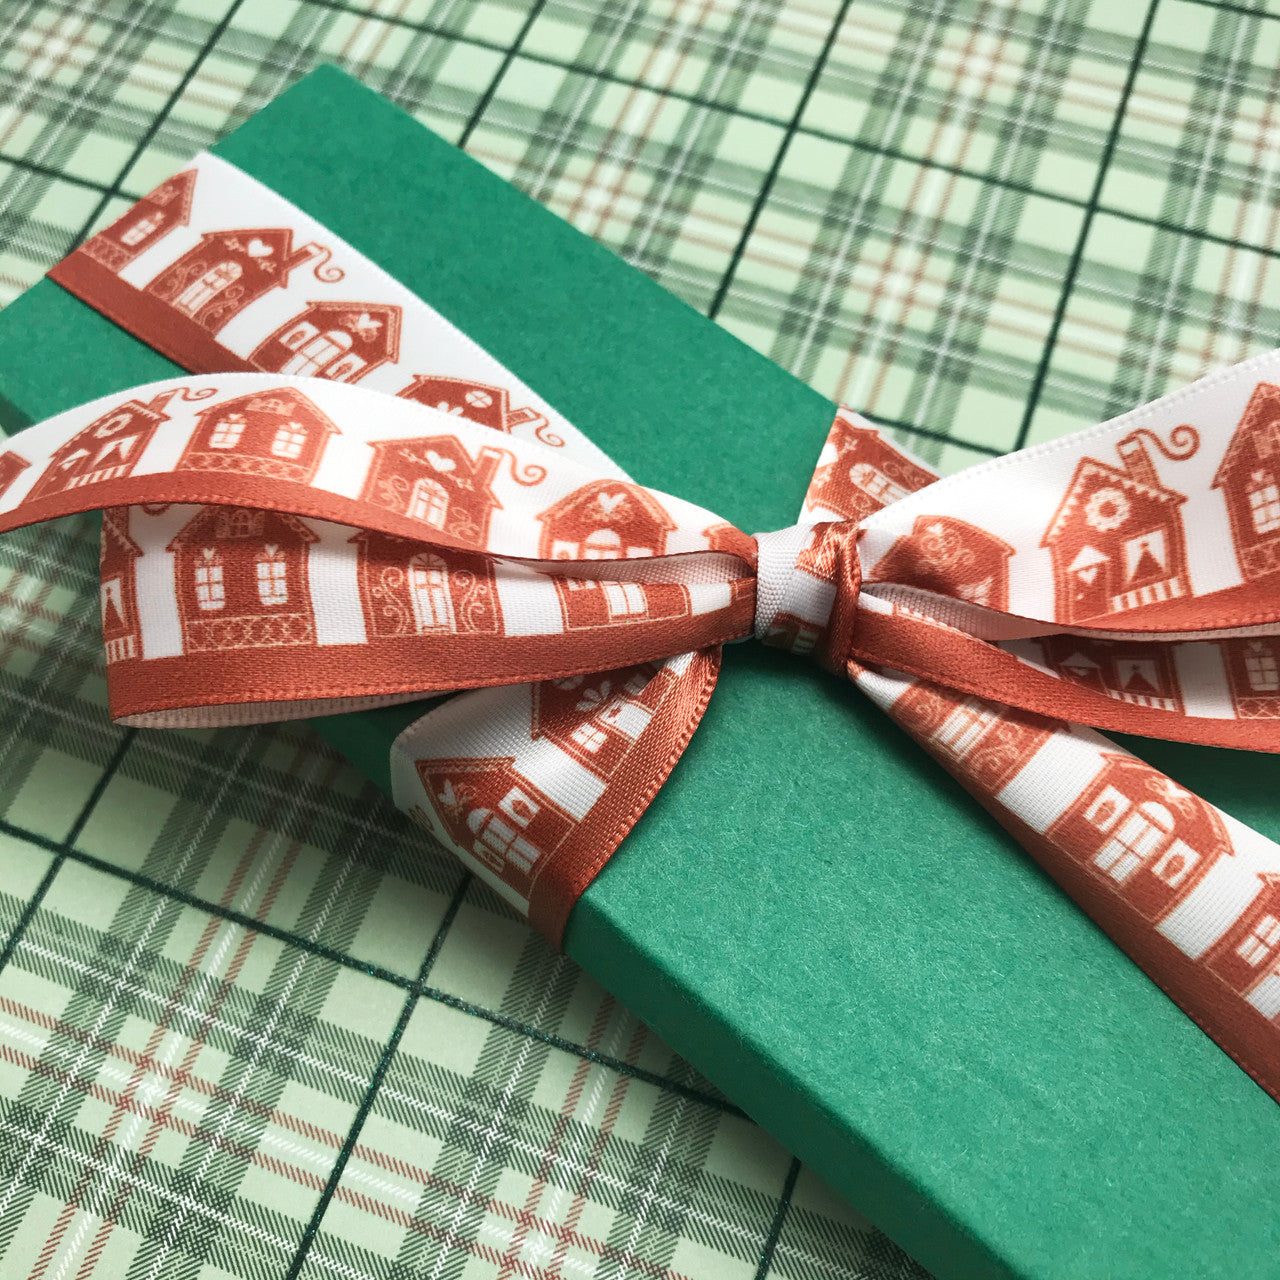 Ginger bread ribbon tied on a green box is the perfect gift for the baker in your life!